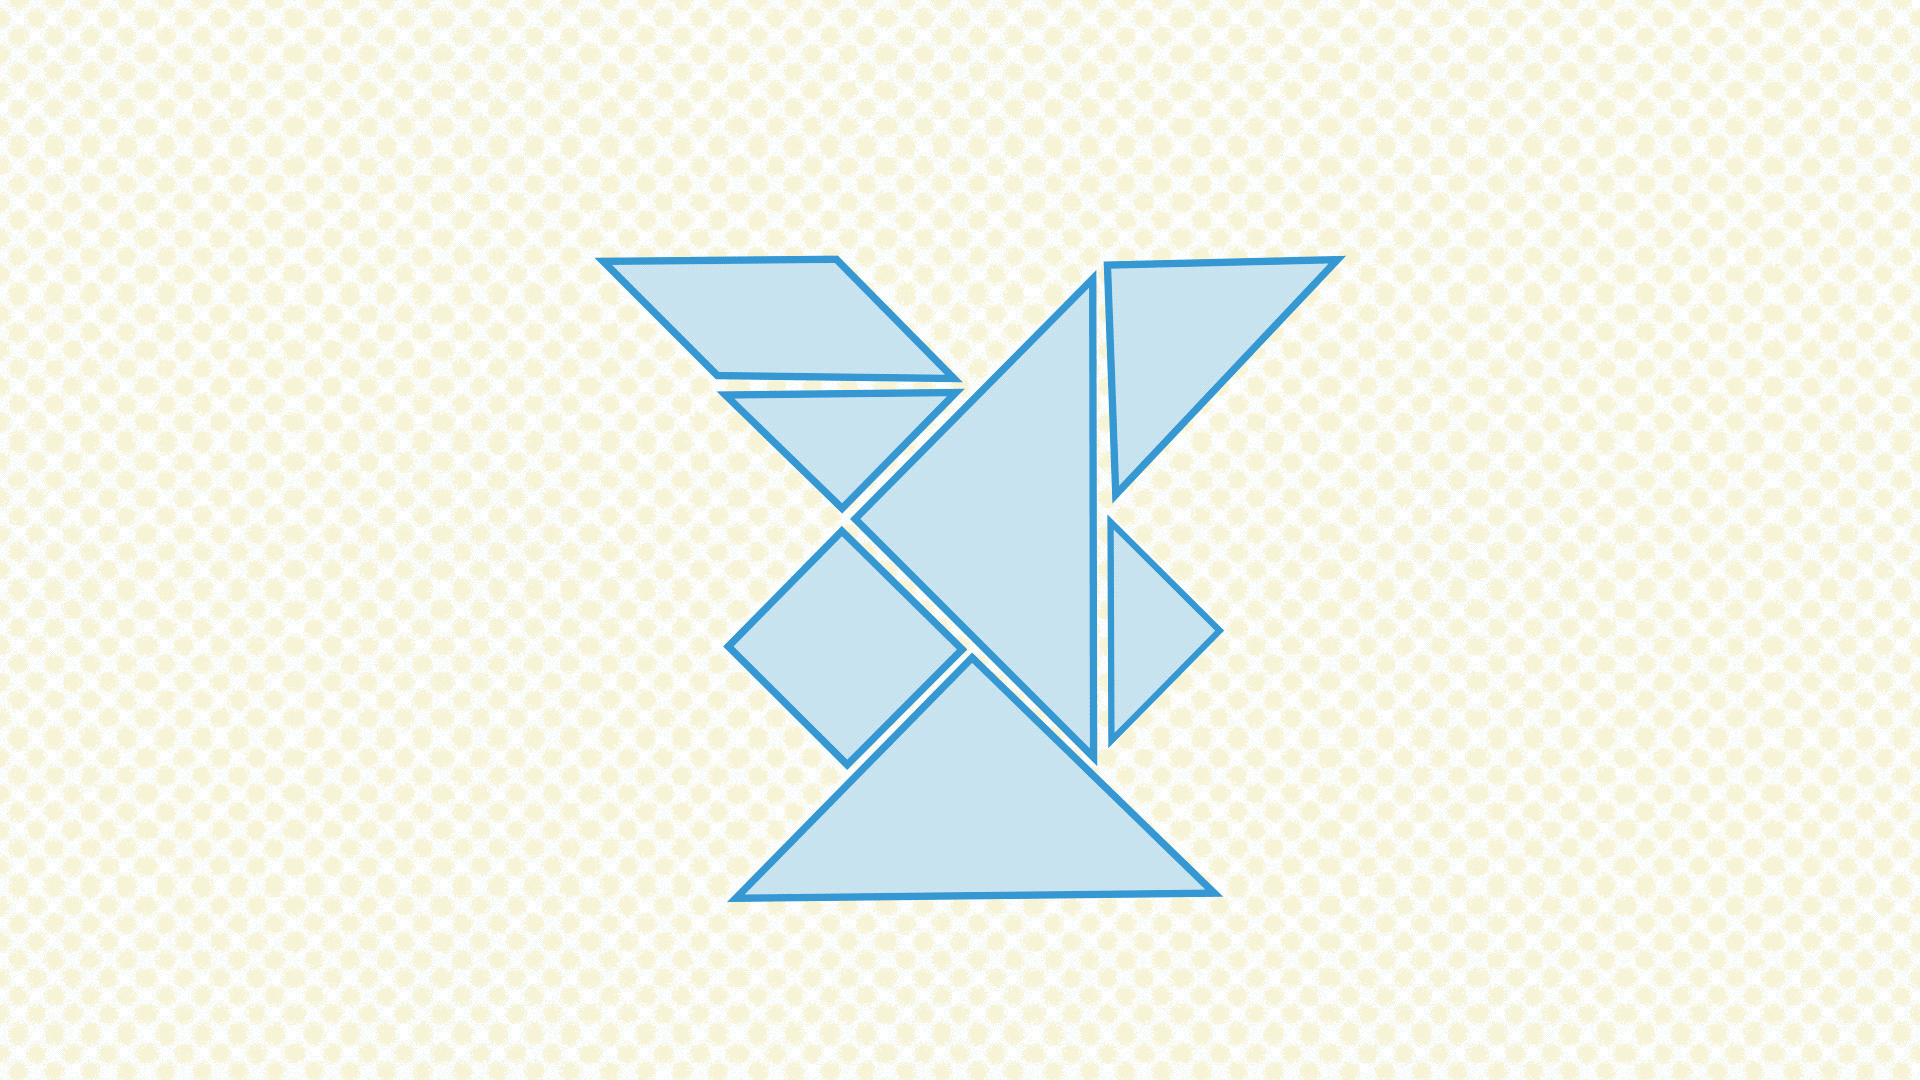 Animation of tangram pieces showing the changes already explored in earlier animations. In this animation, the tangram pieces move around the screen from place to place, indicating the individual changes that make up the shapes outlined in solids above.